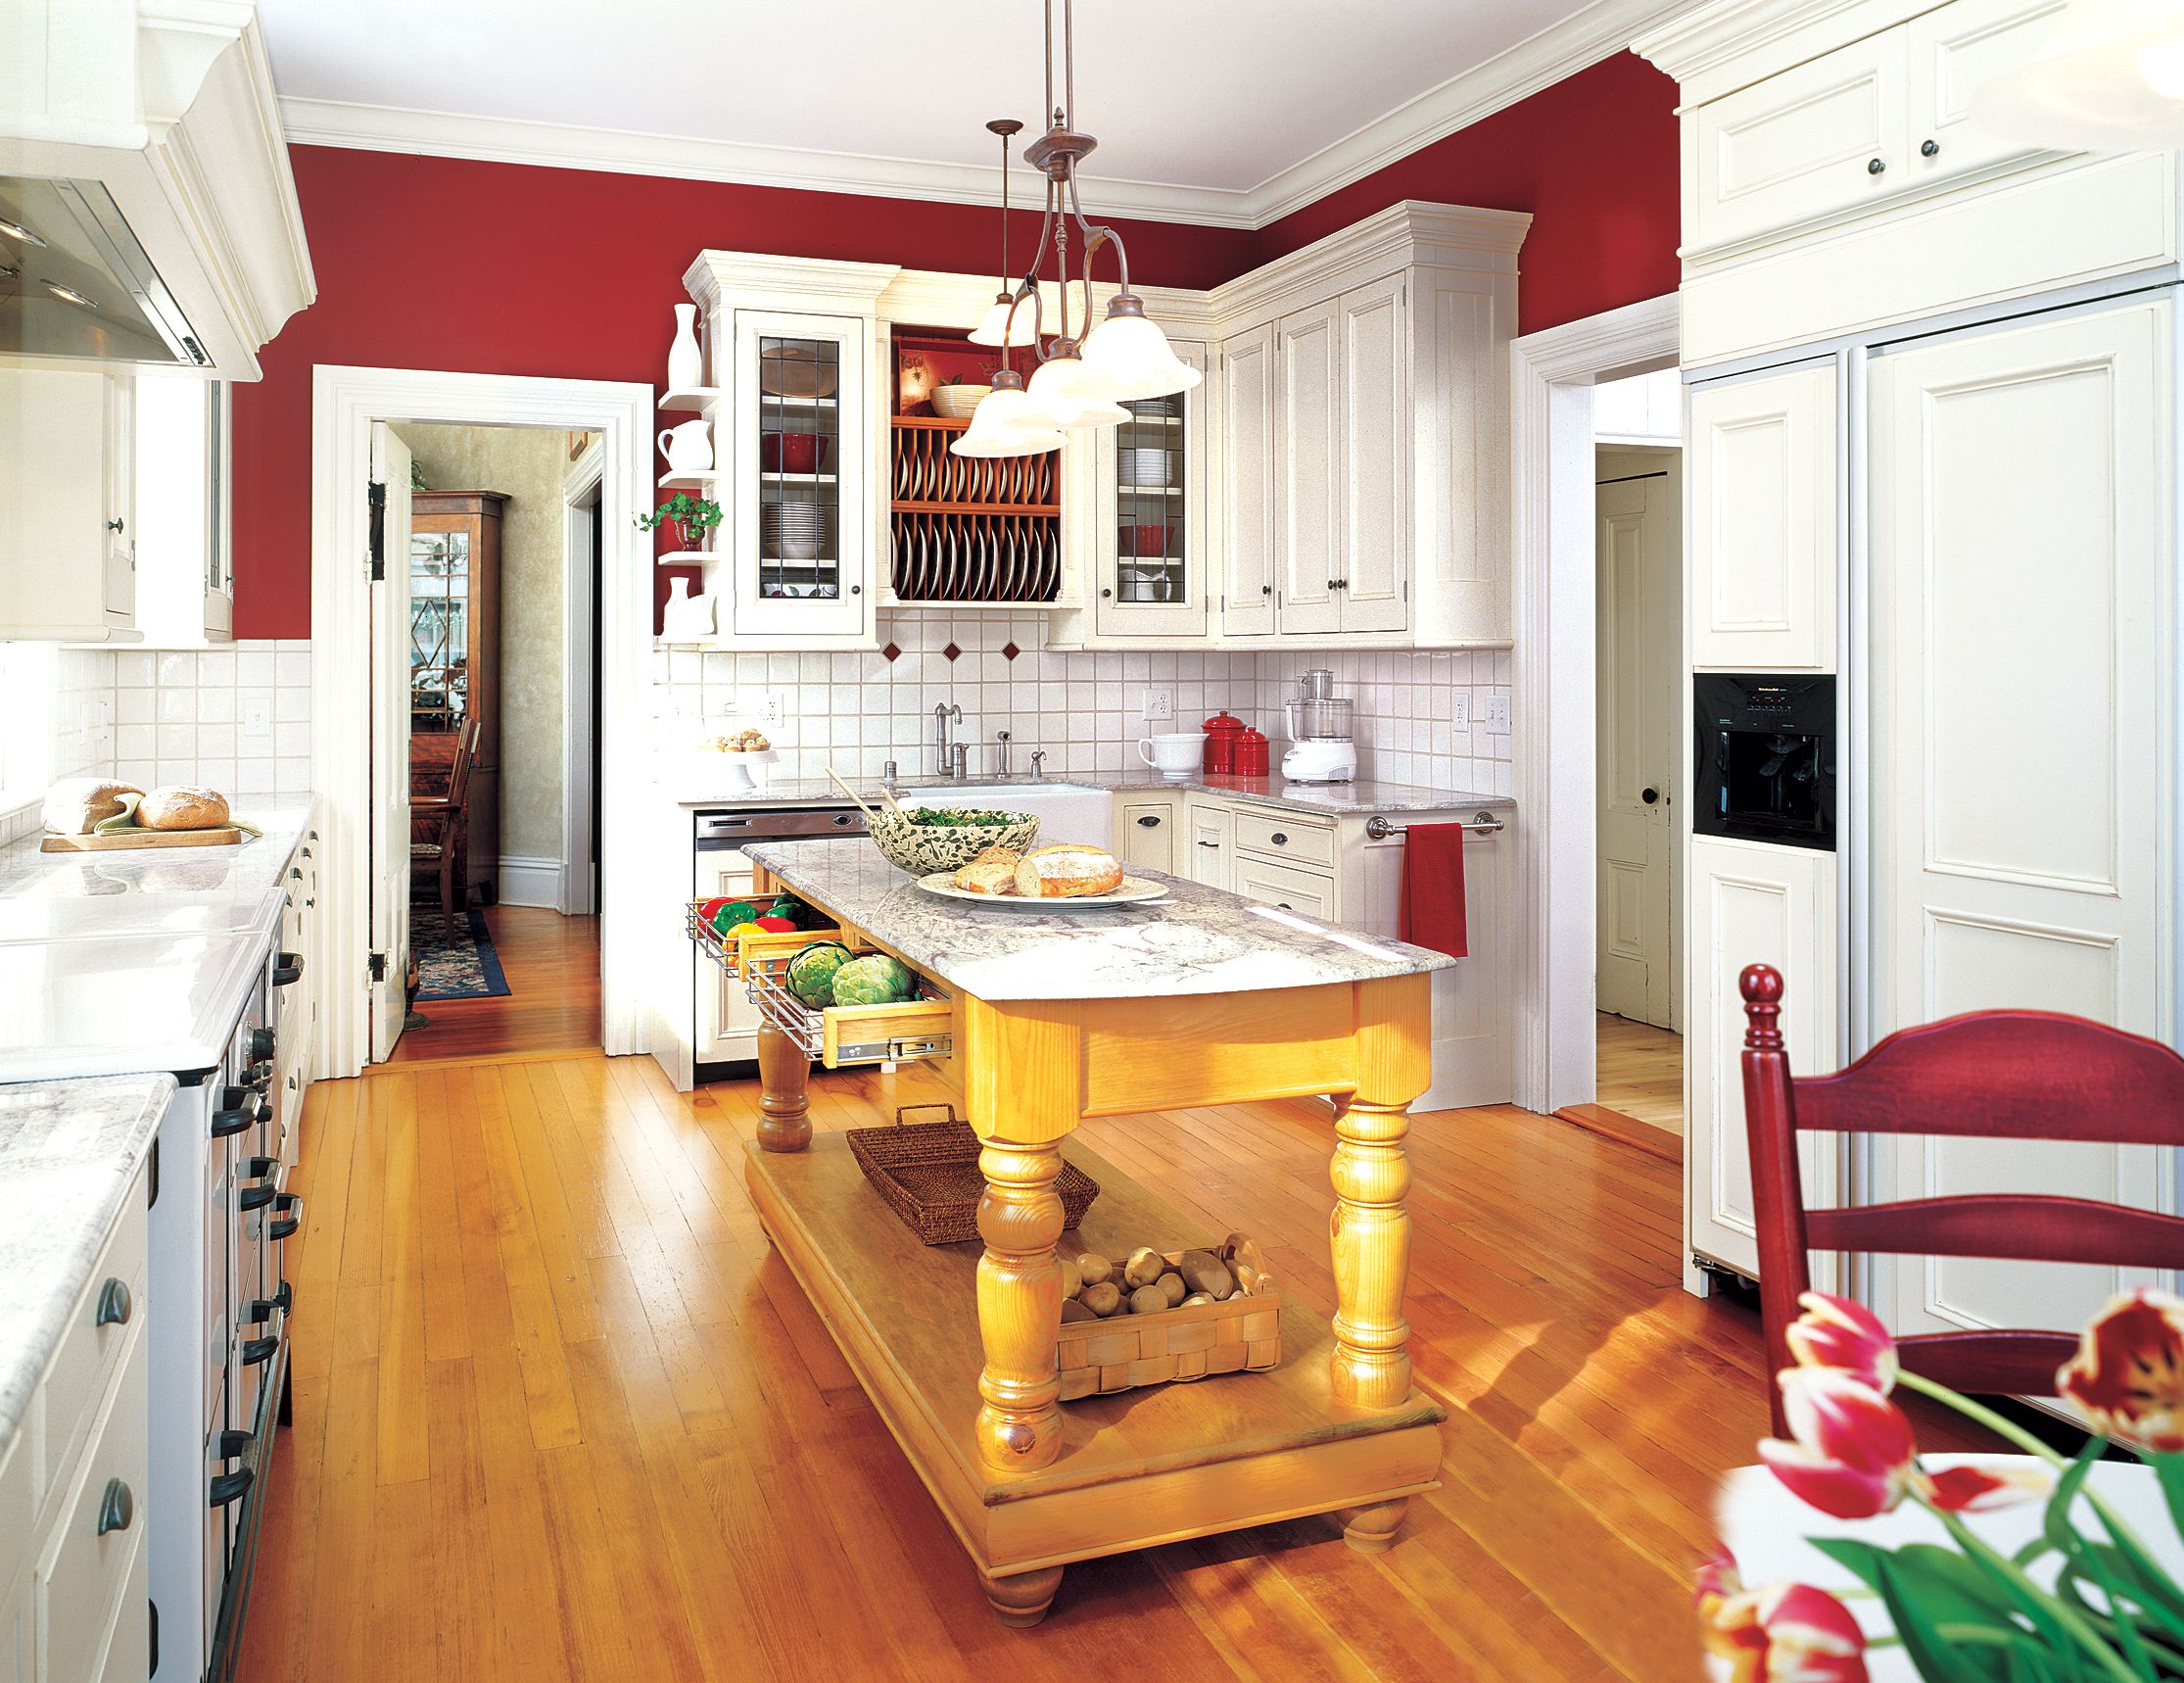 All About Kitchen Islands - This Old House